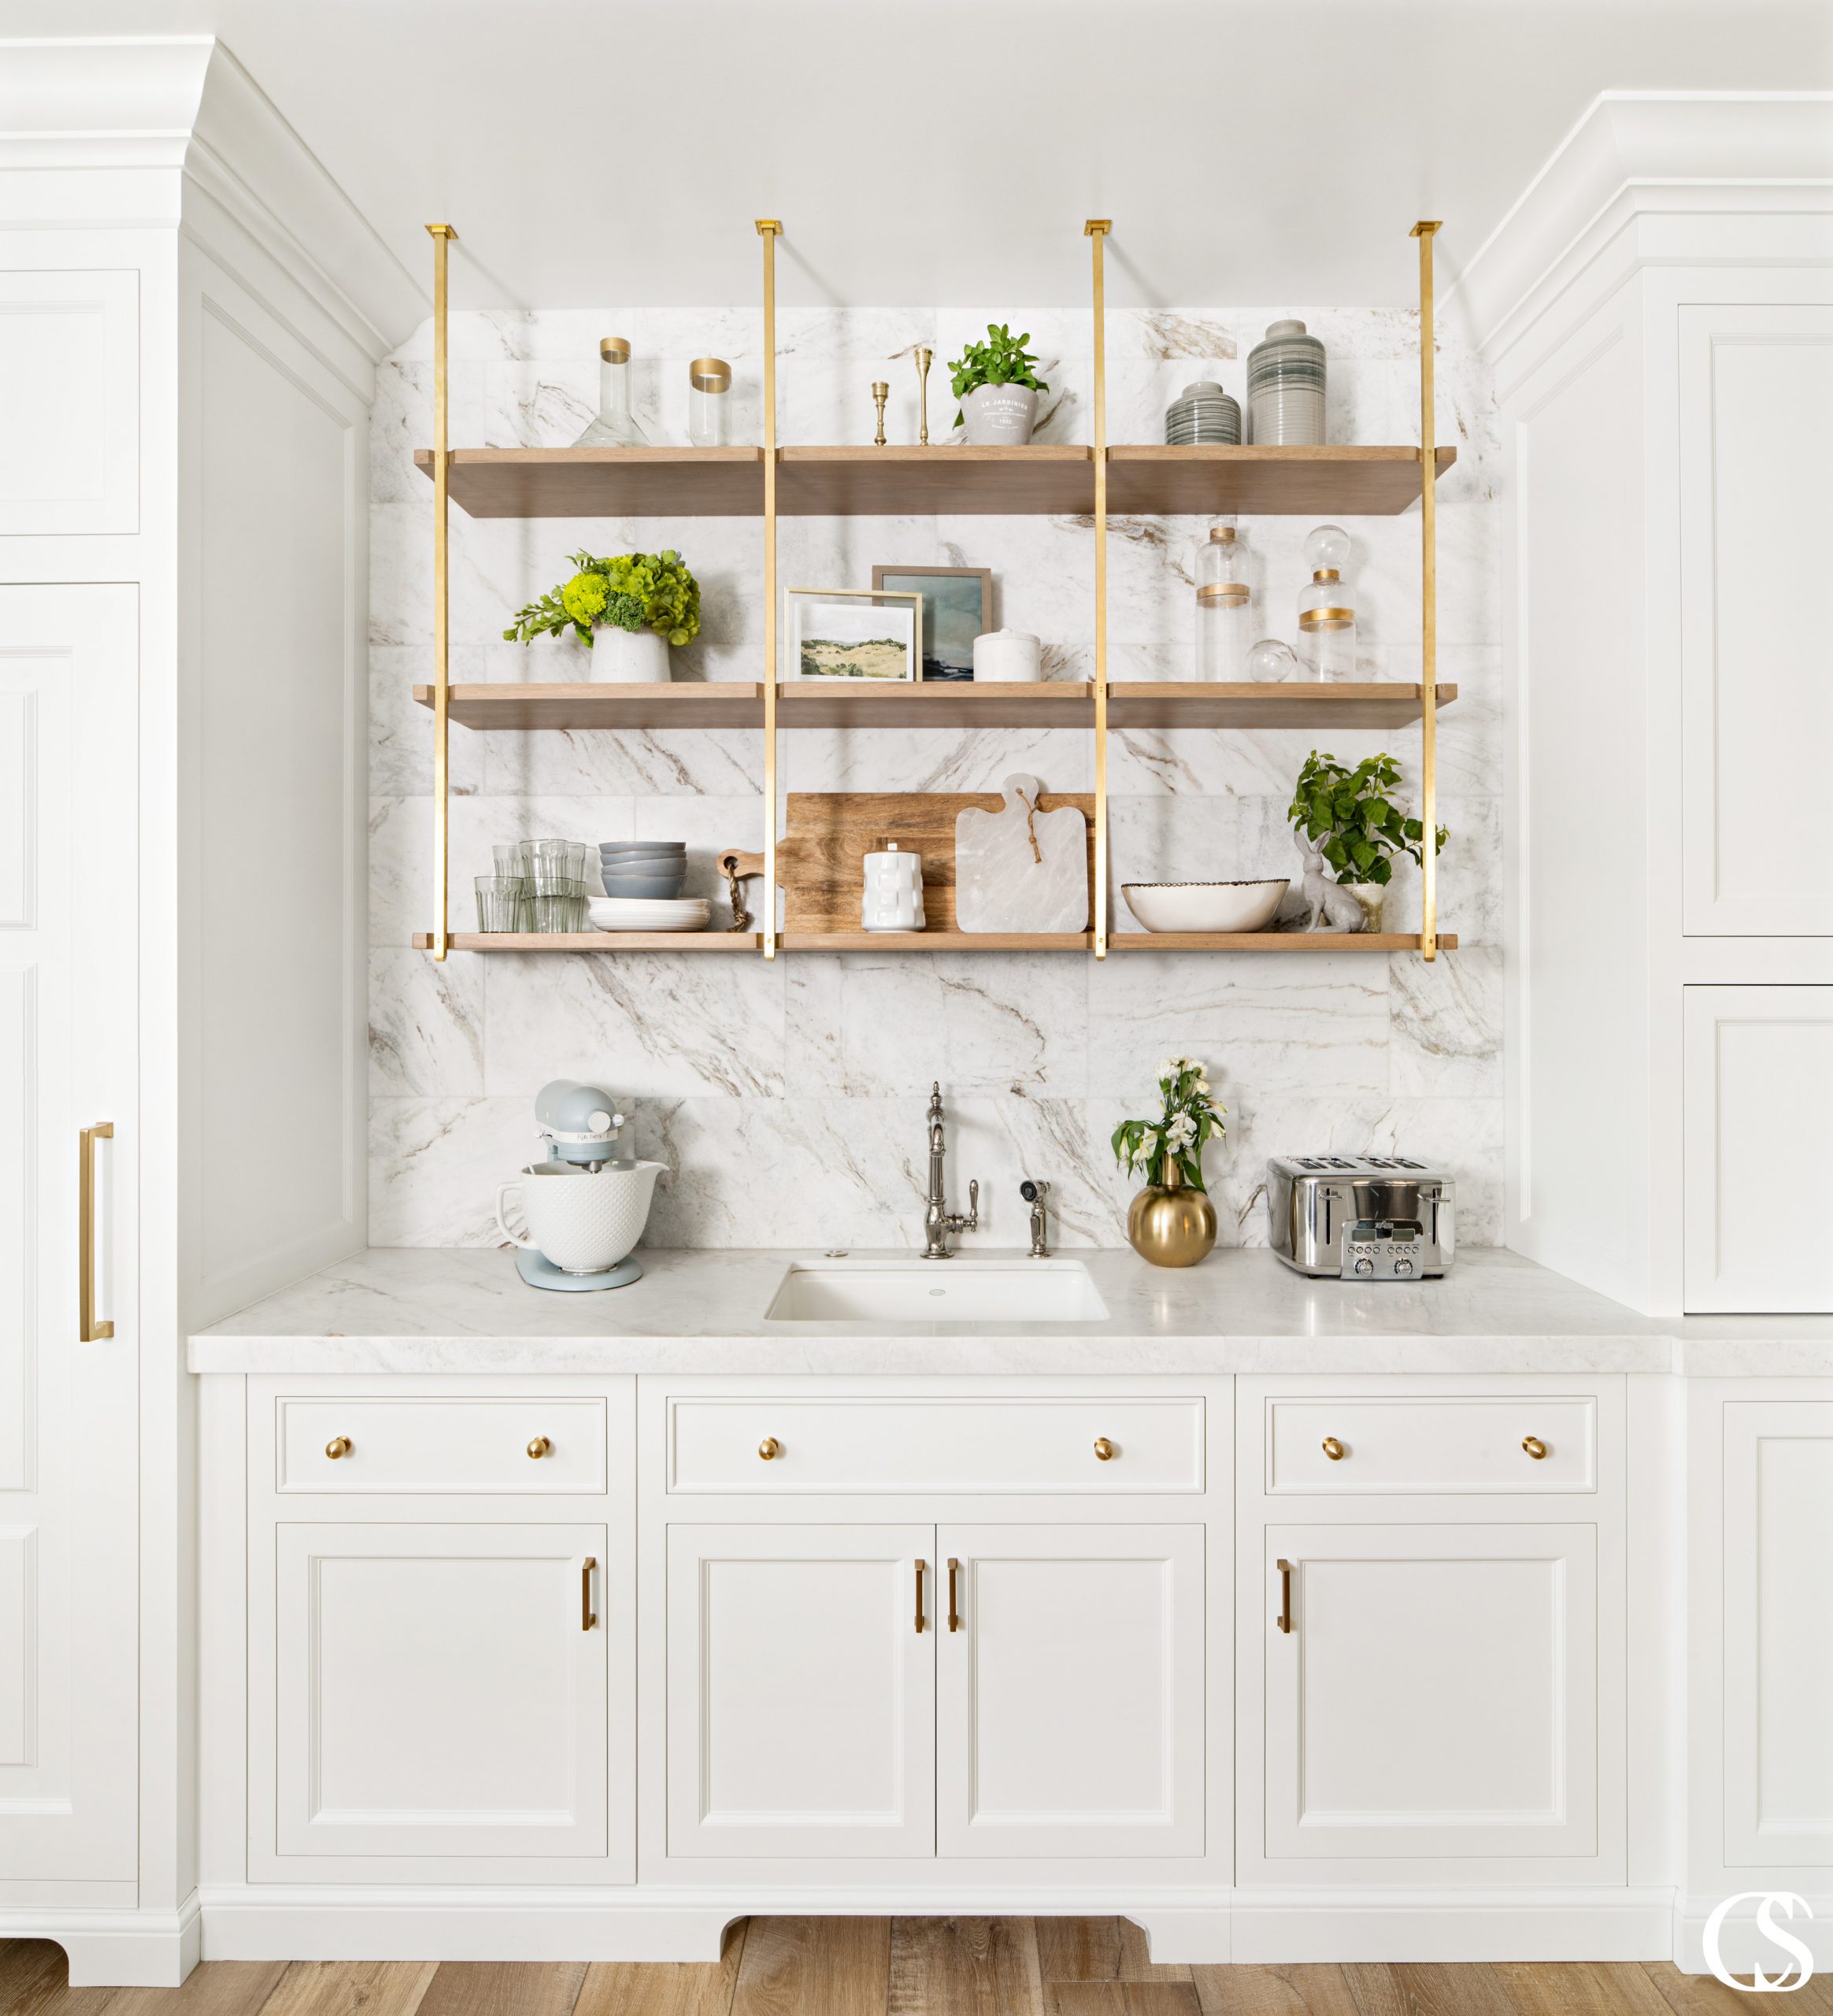 Are custom cabinets worth it? Every little detail of these custom cabinets designed for the kitchen screams YES.